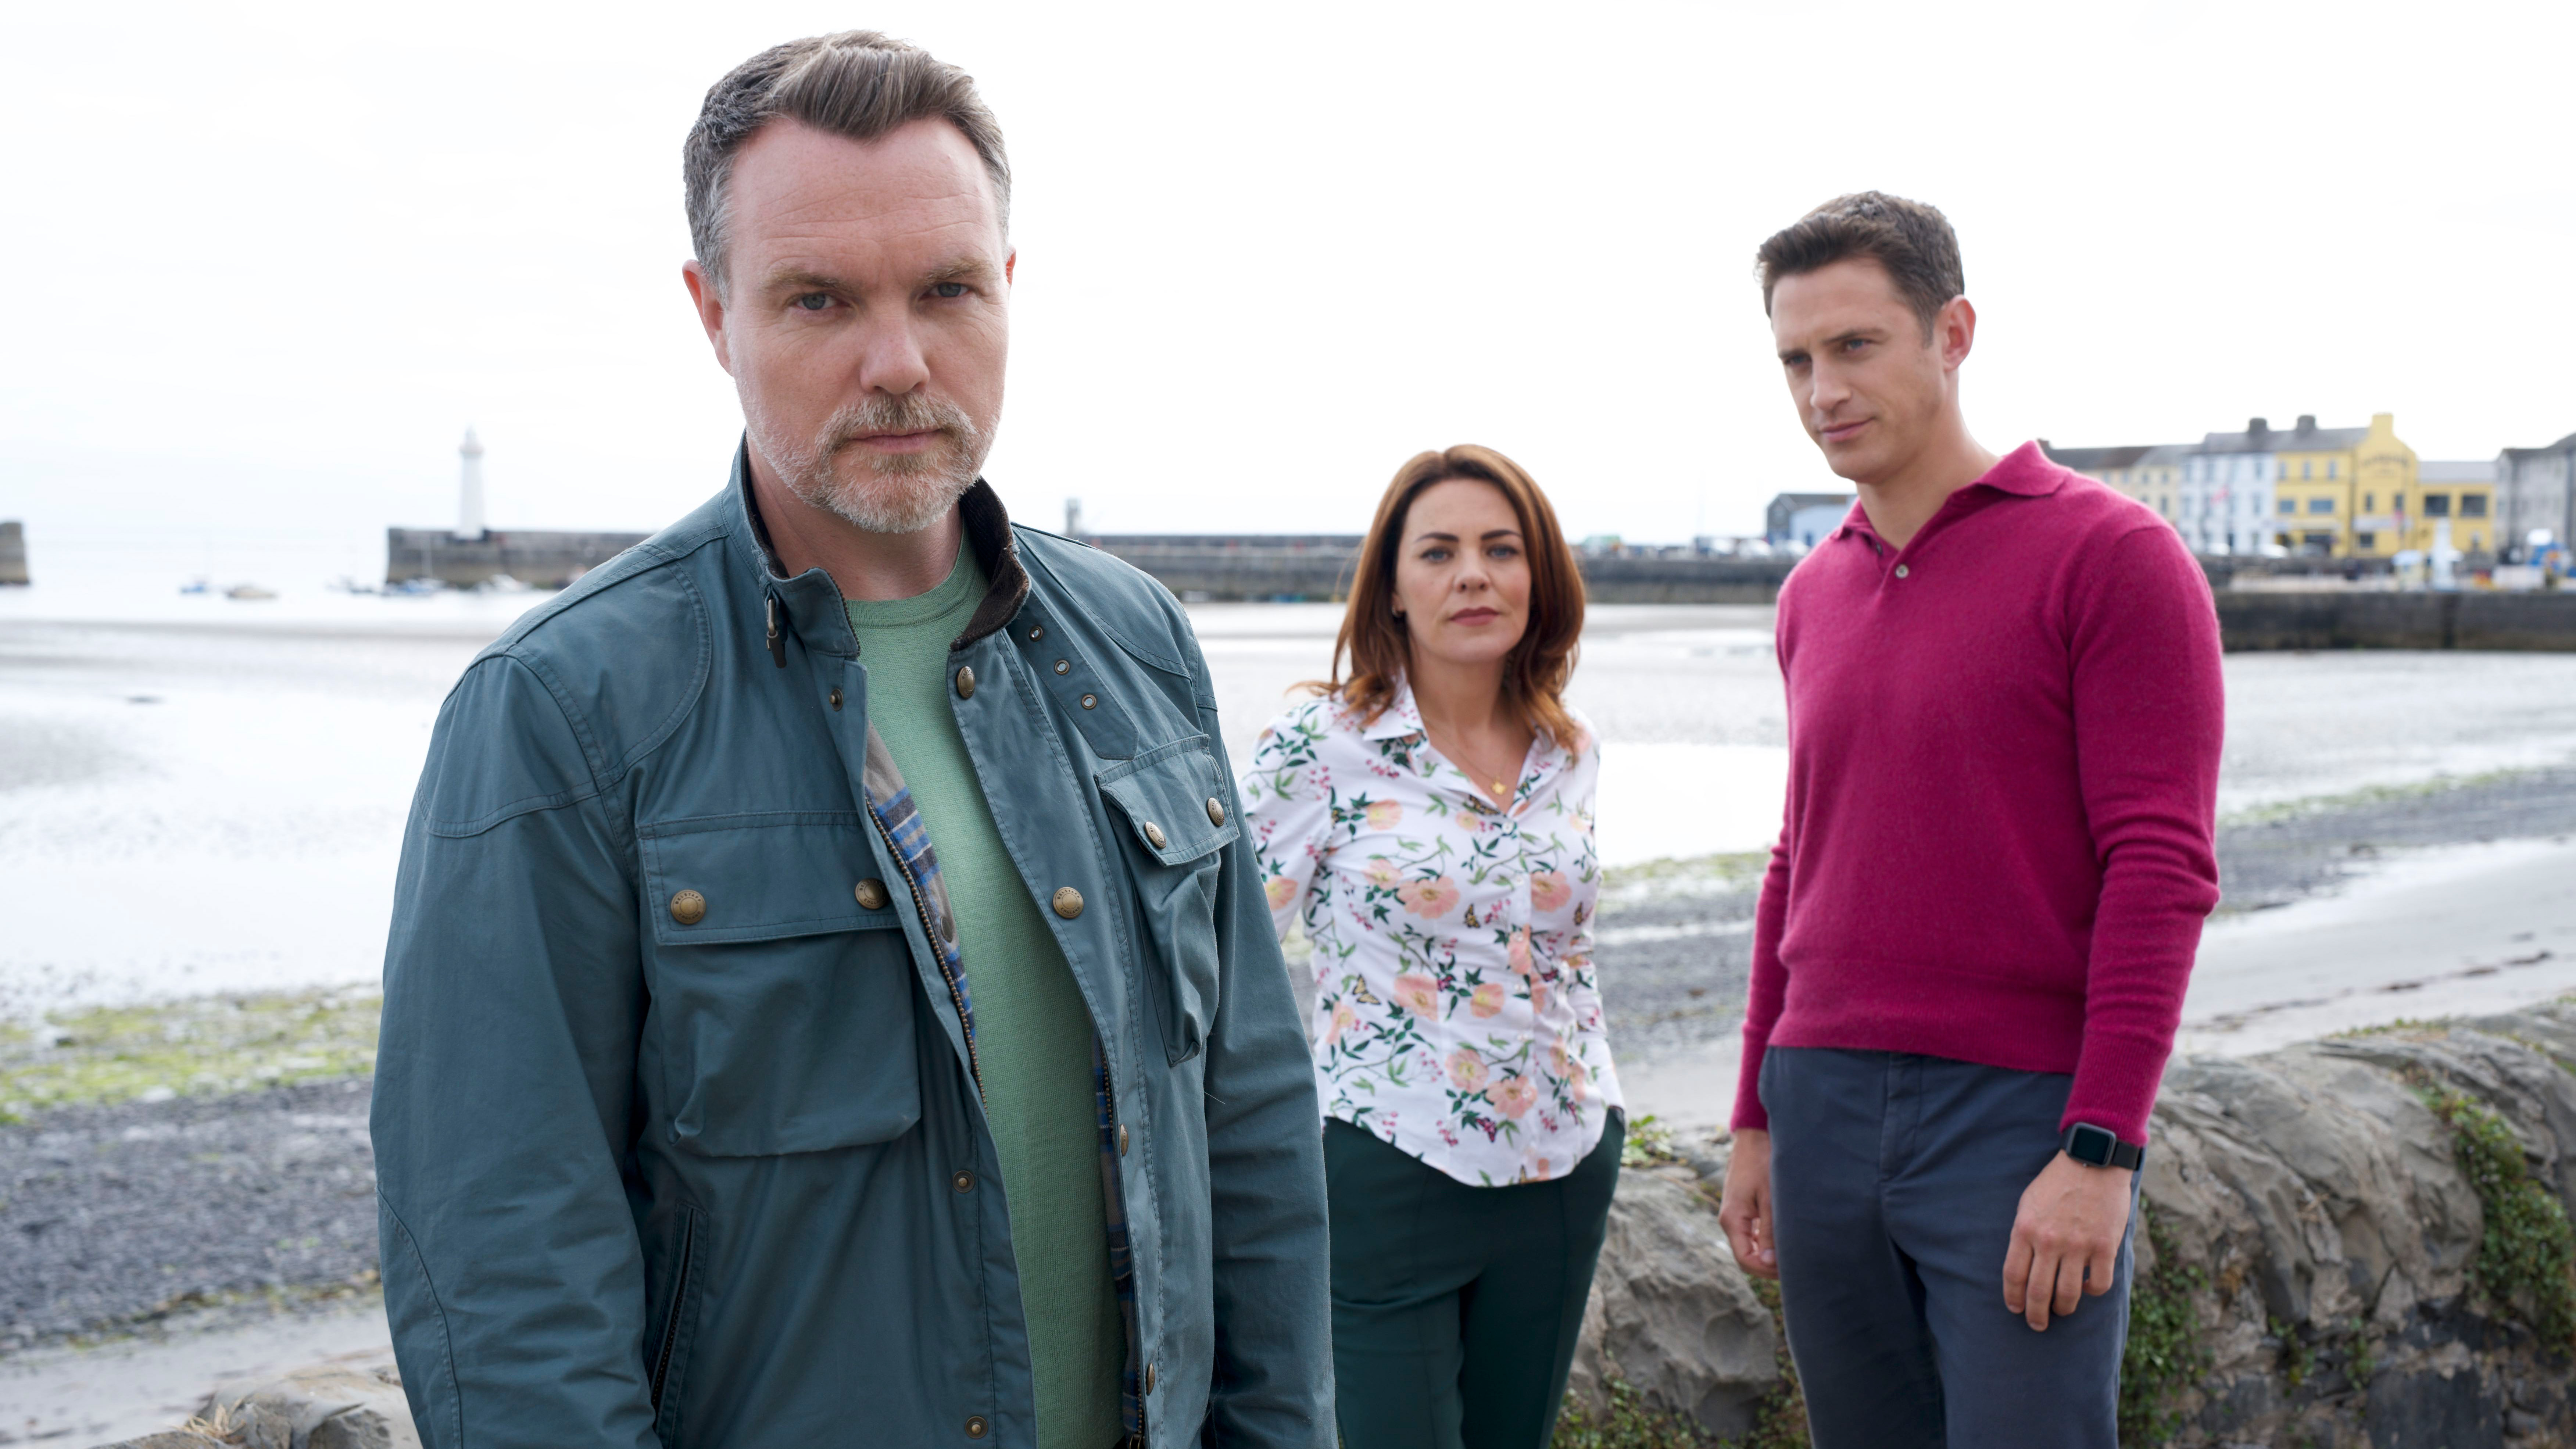 HOPE STREET Season 2 - The Port Devine station is joined by a new detective, Al Quinn (Stephen Hagan) who is an old friend of Finn (Ciarán McMenamin) and Siobhan's (Rachel Tucker).